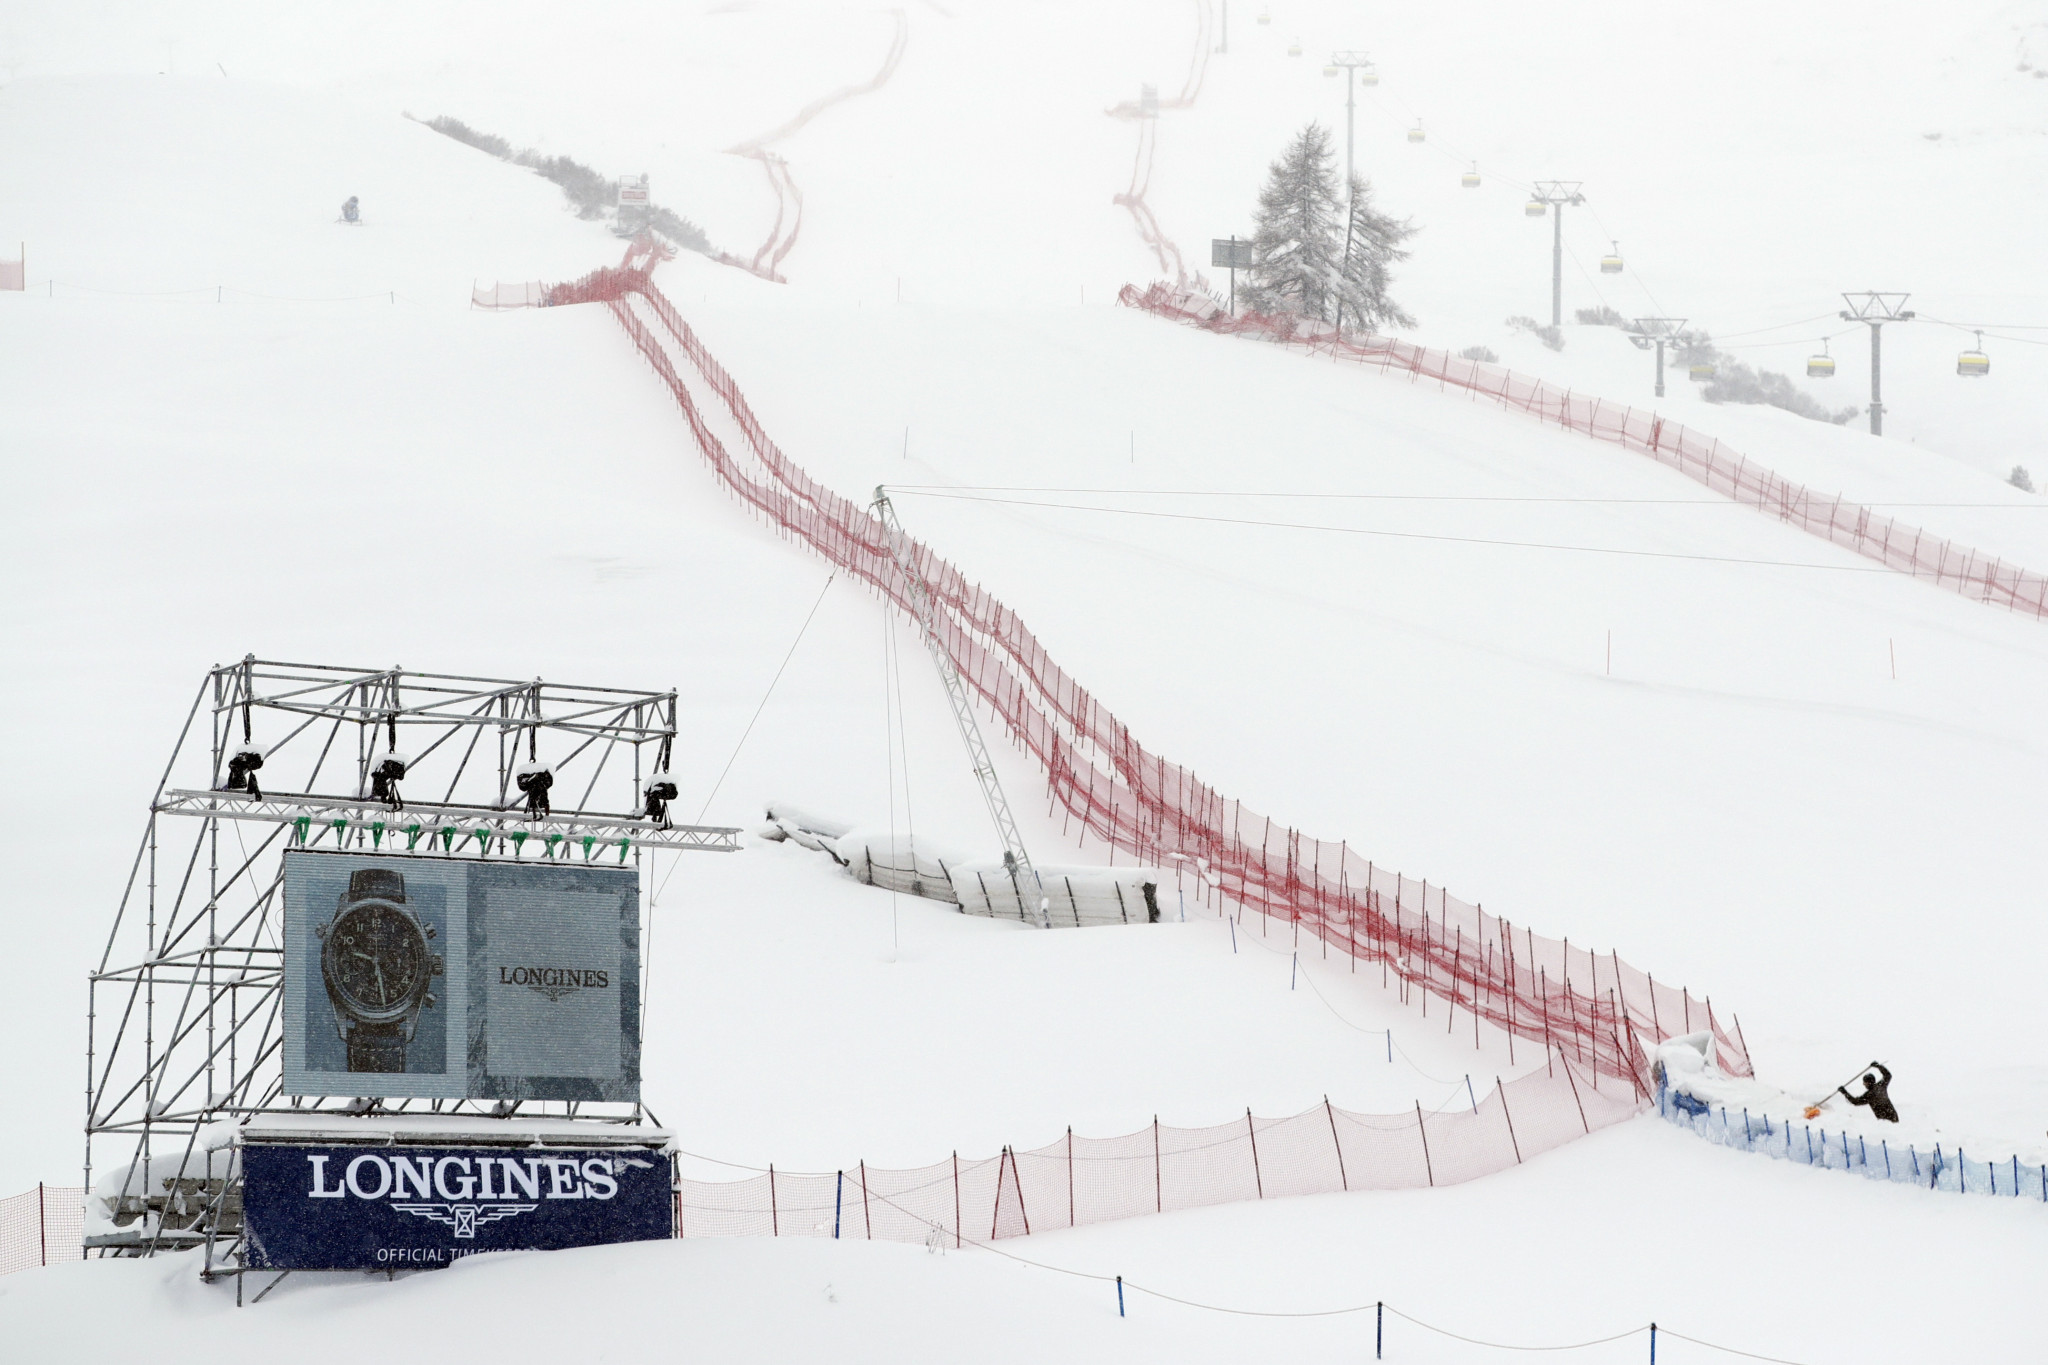 Super-G race in St Moritz cancelled because of heavy snowfall